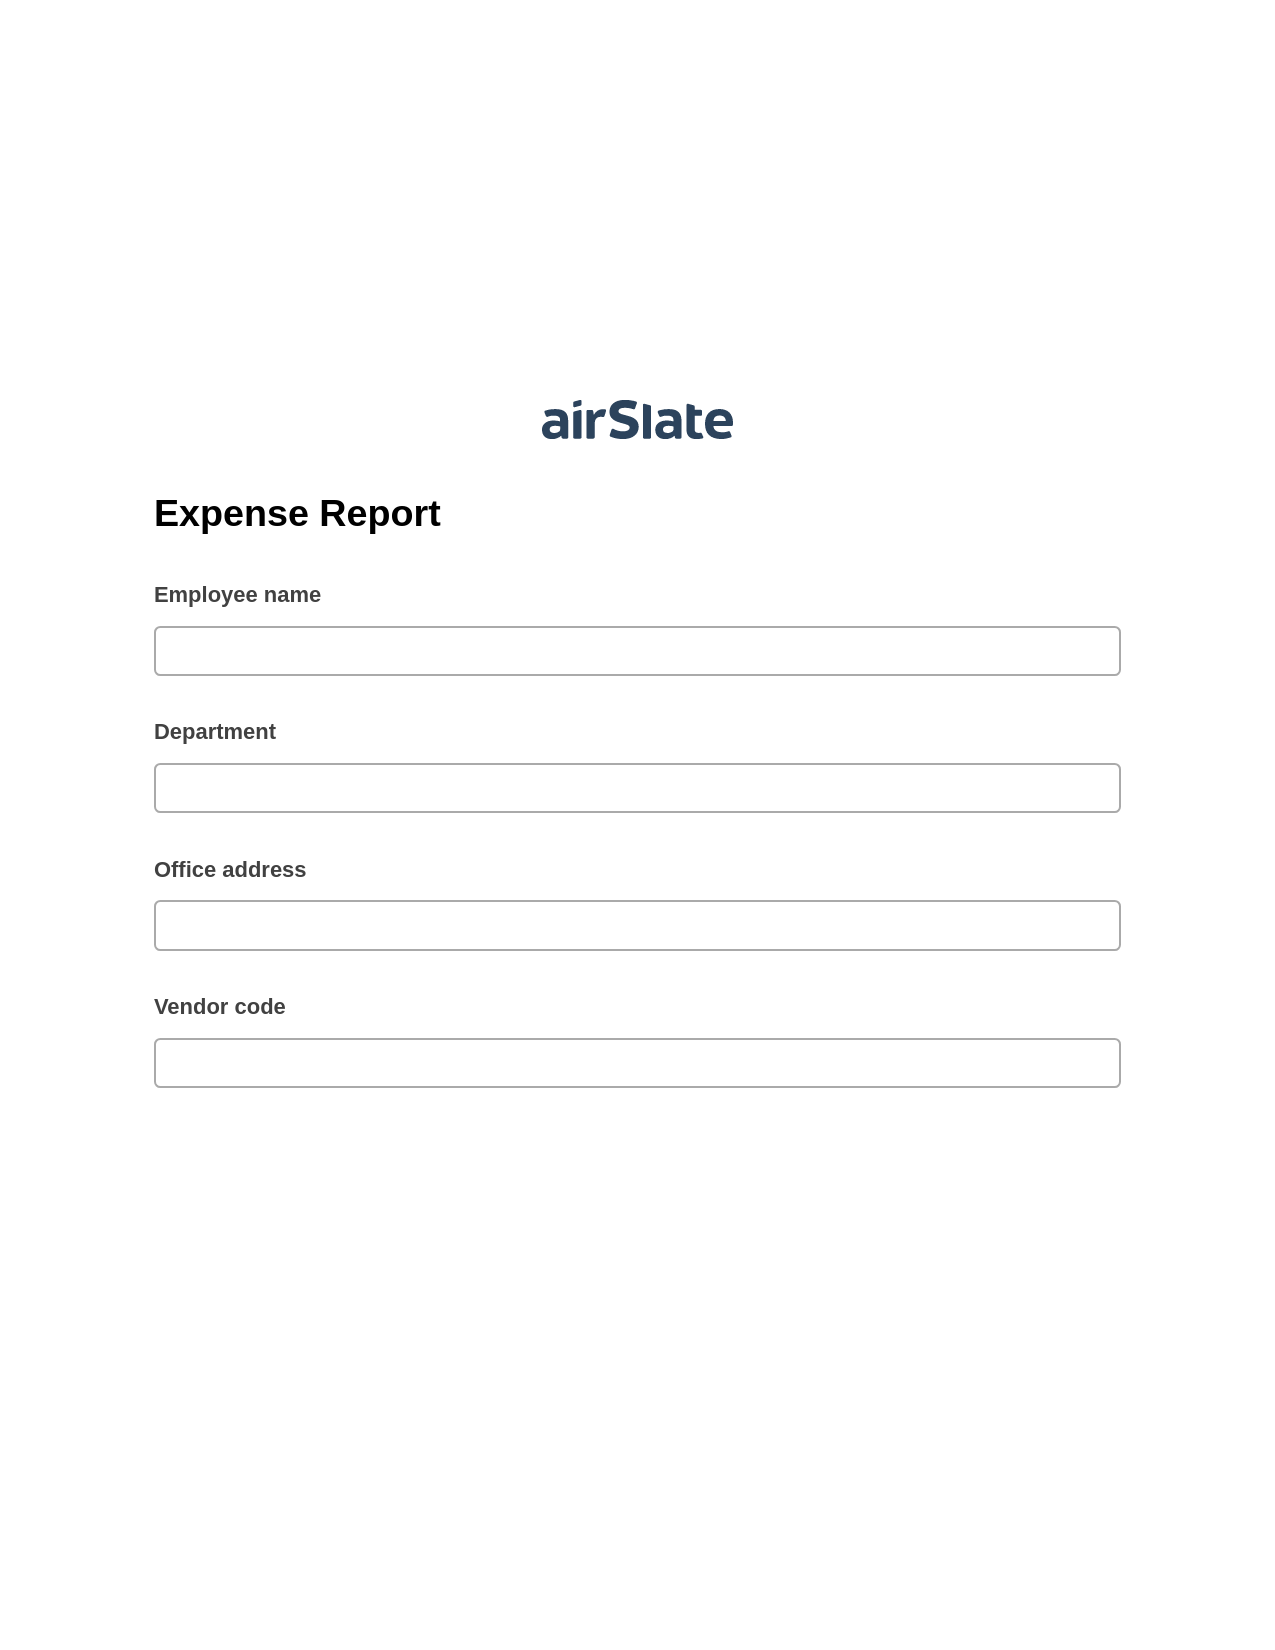 Expense Report Pre-fill from Excel Spreadsheet Bot, Webhook Bot, Box Bot